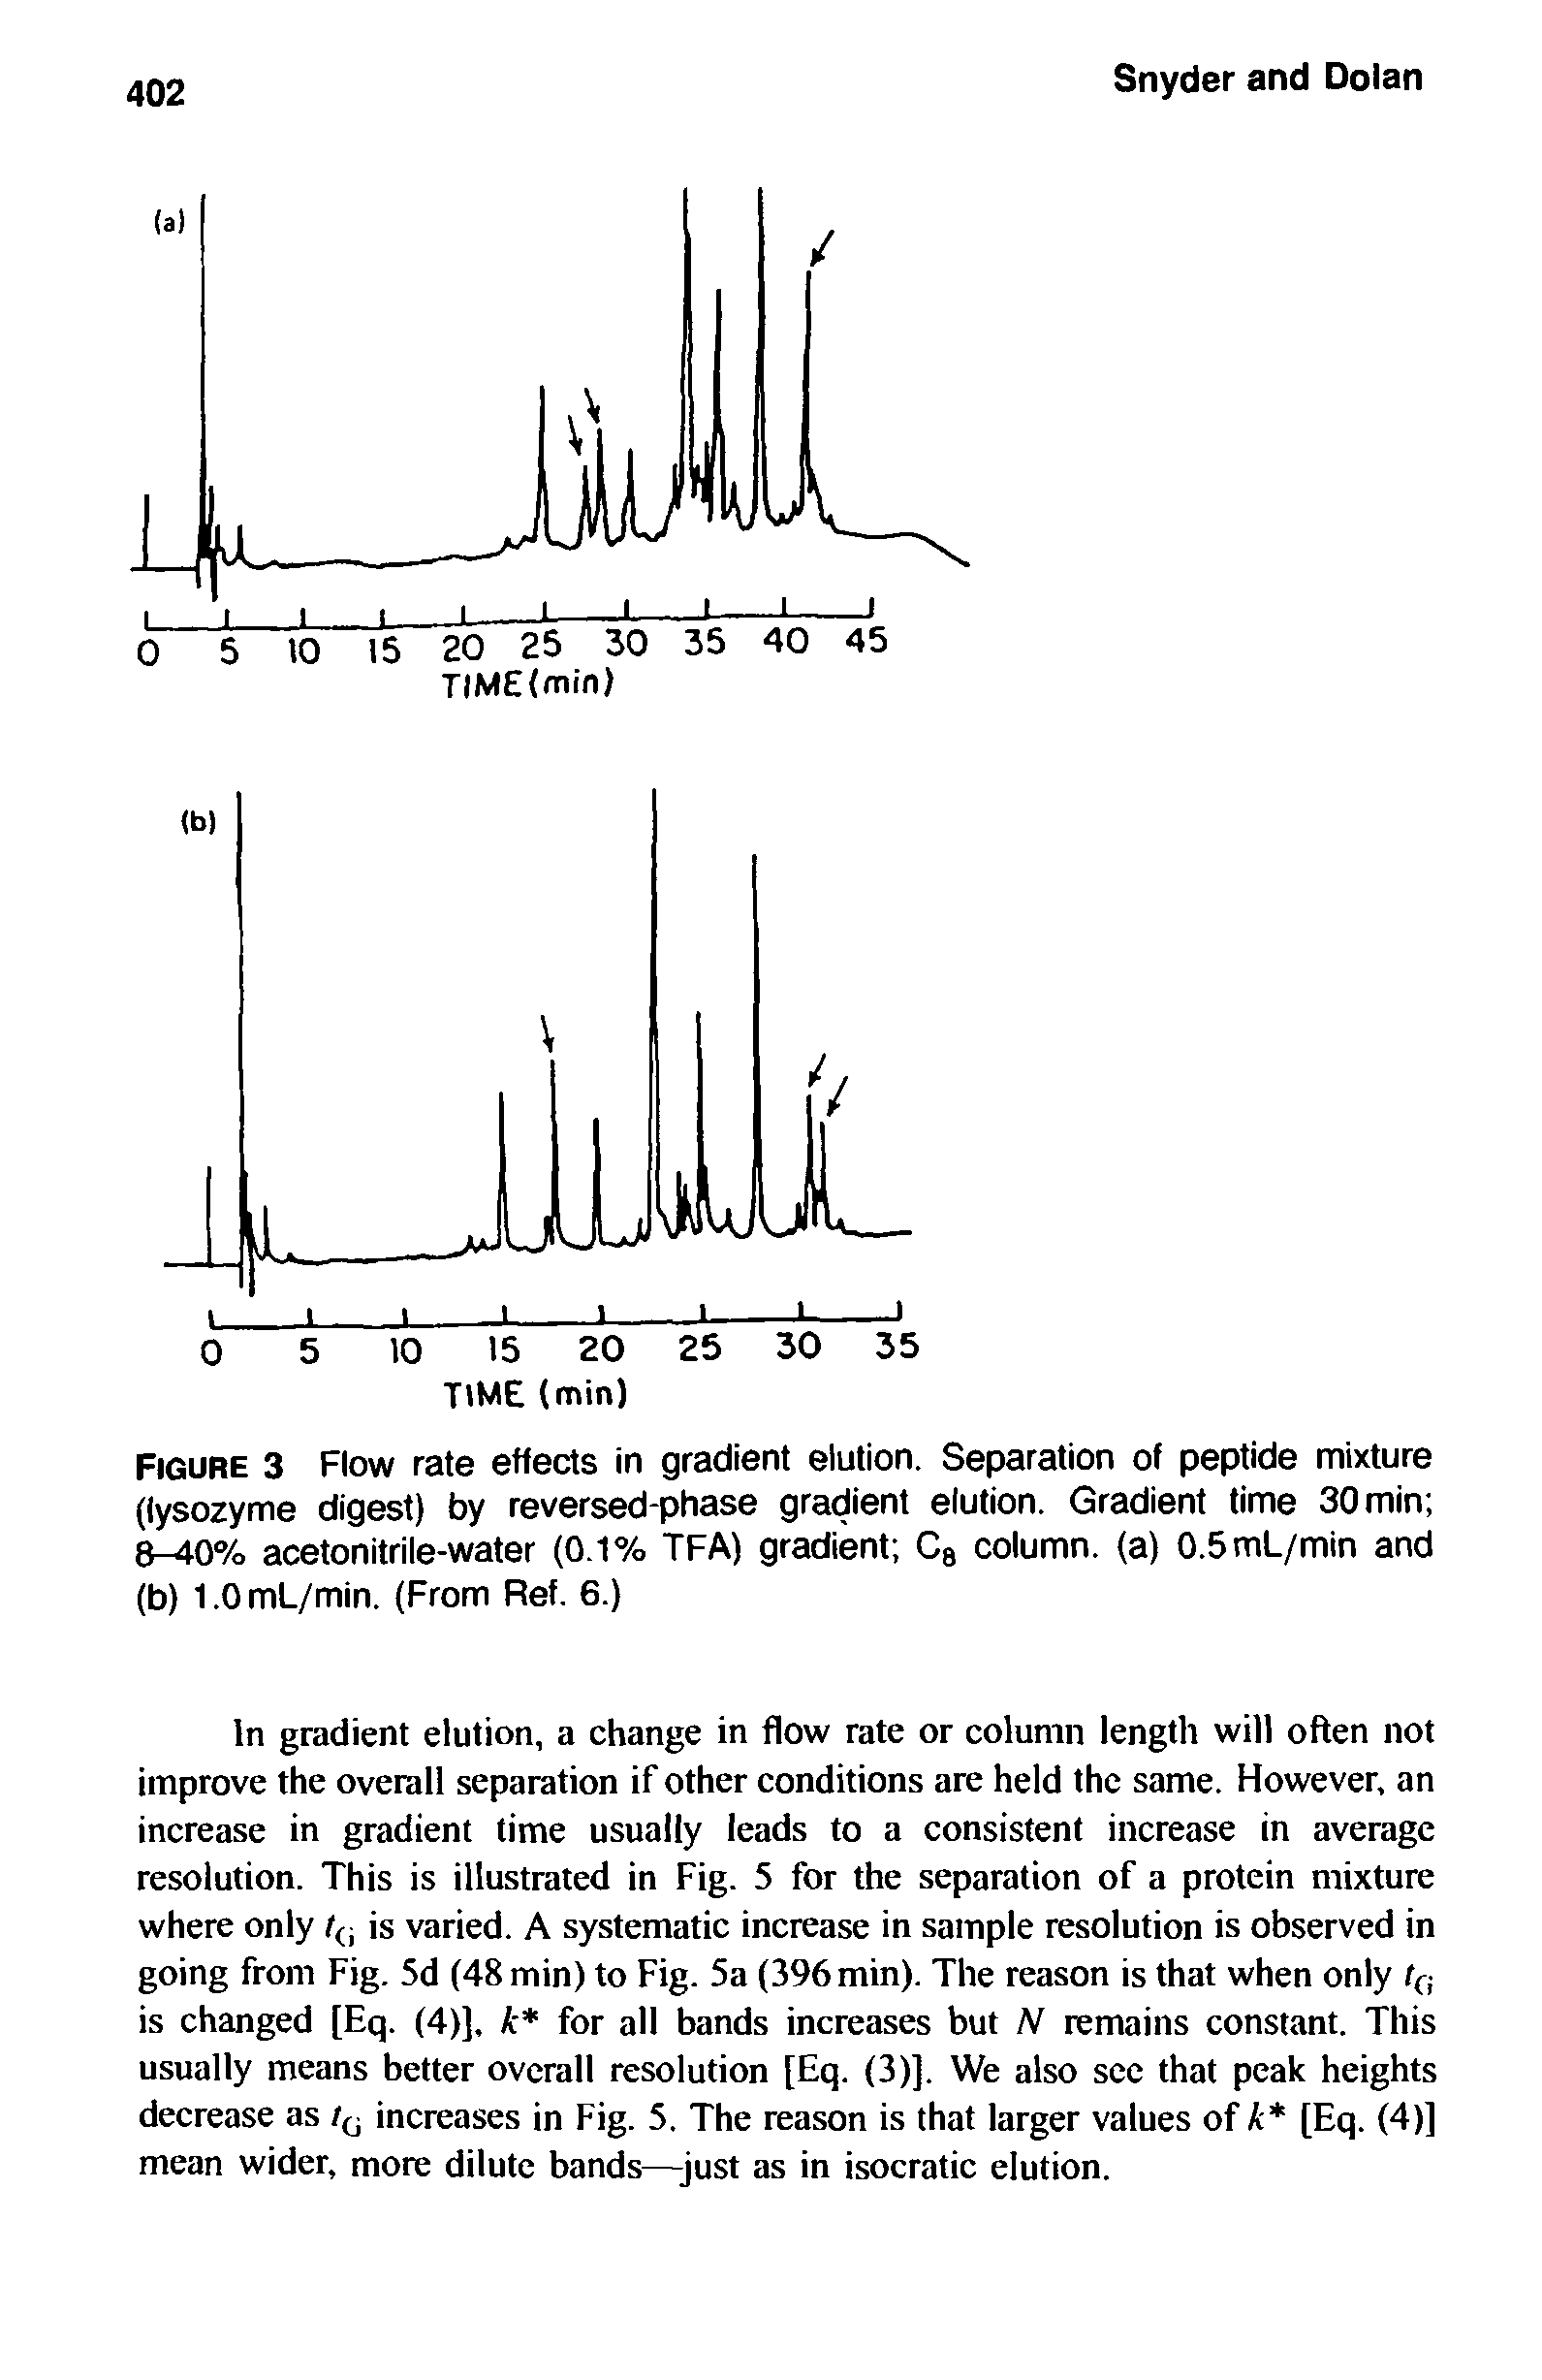 Figure 3 Flow rate effects in gradient elution. Separation of peptide mixture (lysozyme digest) by reversed-phase gradient elution. Gradient time 30 min 8-40% acetonitrile-water (0.1% TFA) gradient Cg column, (a) 0.5mL/min and (b) 1.0 mL/min. (From Ref. 6.)...